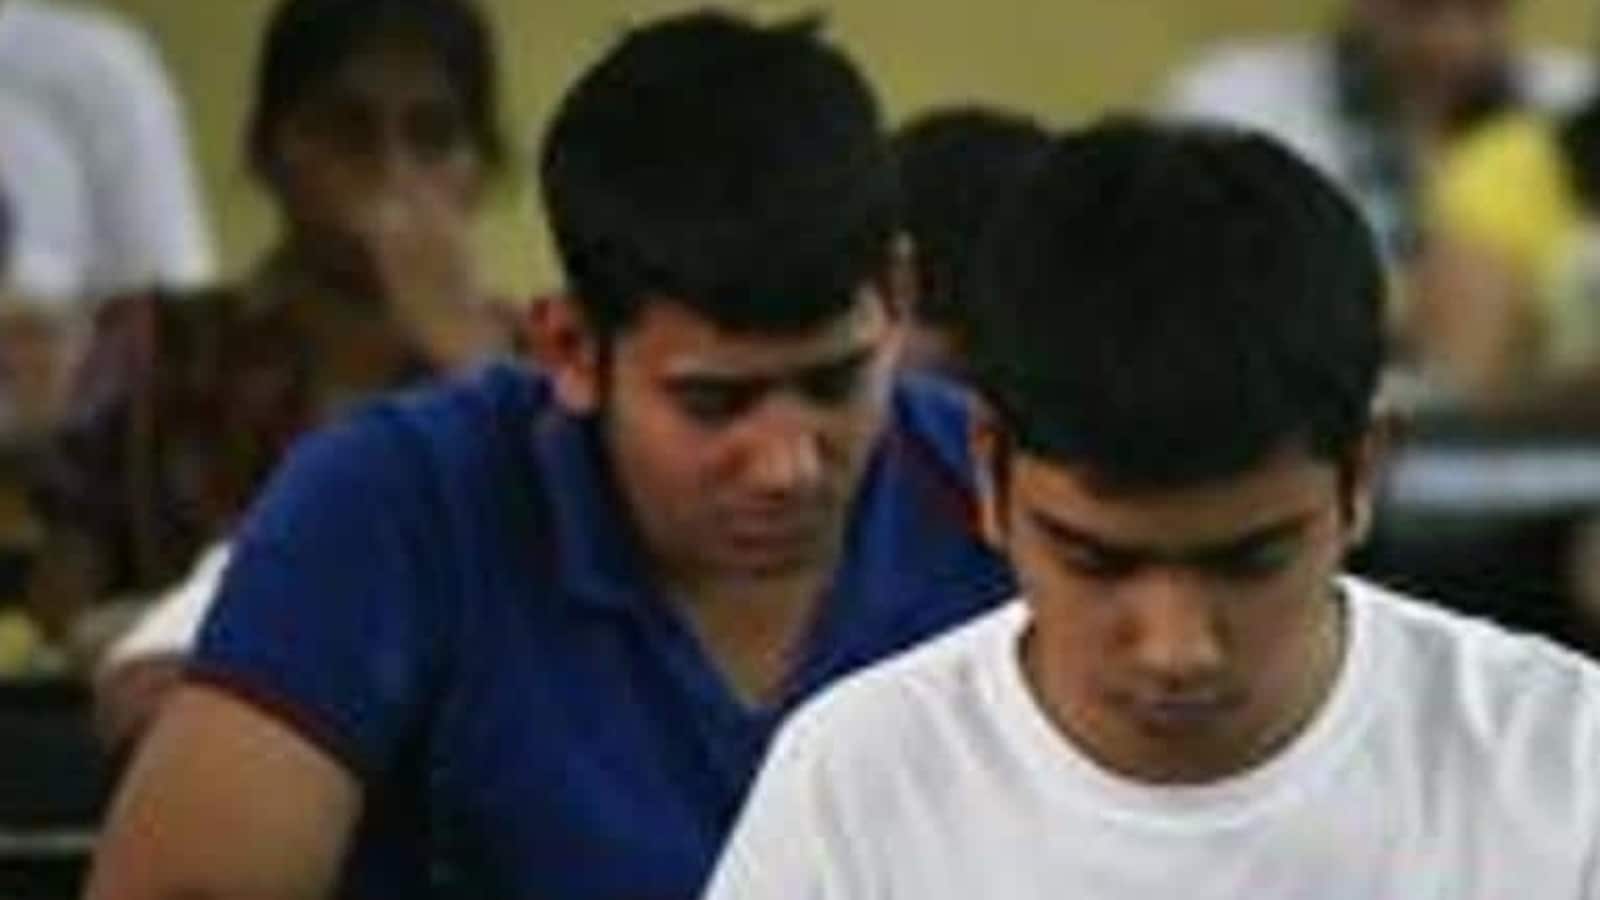 JEE Main April session exam admit card released, direct link